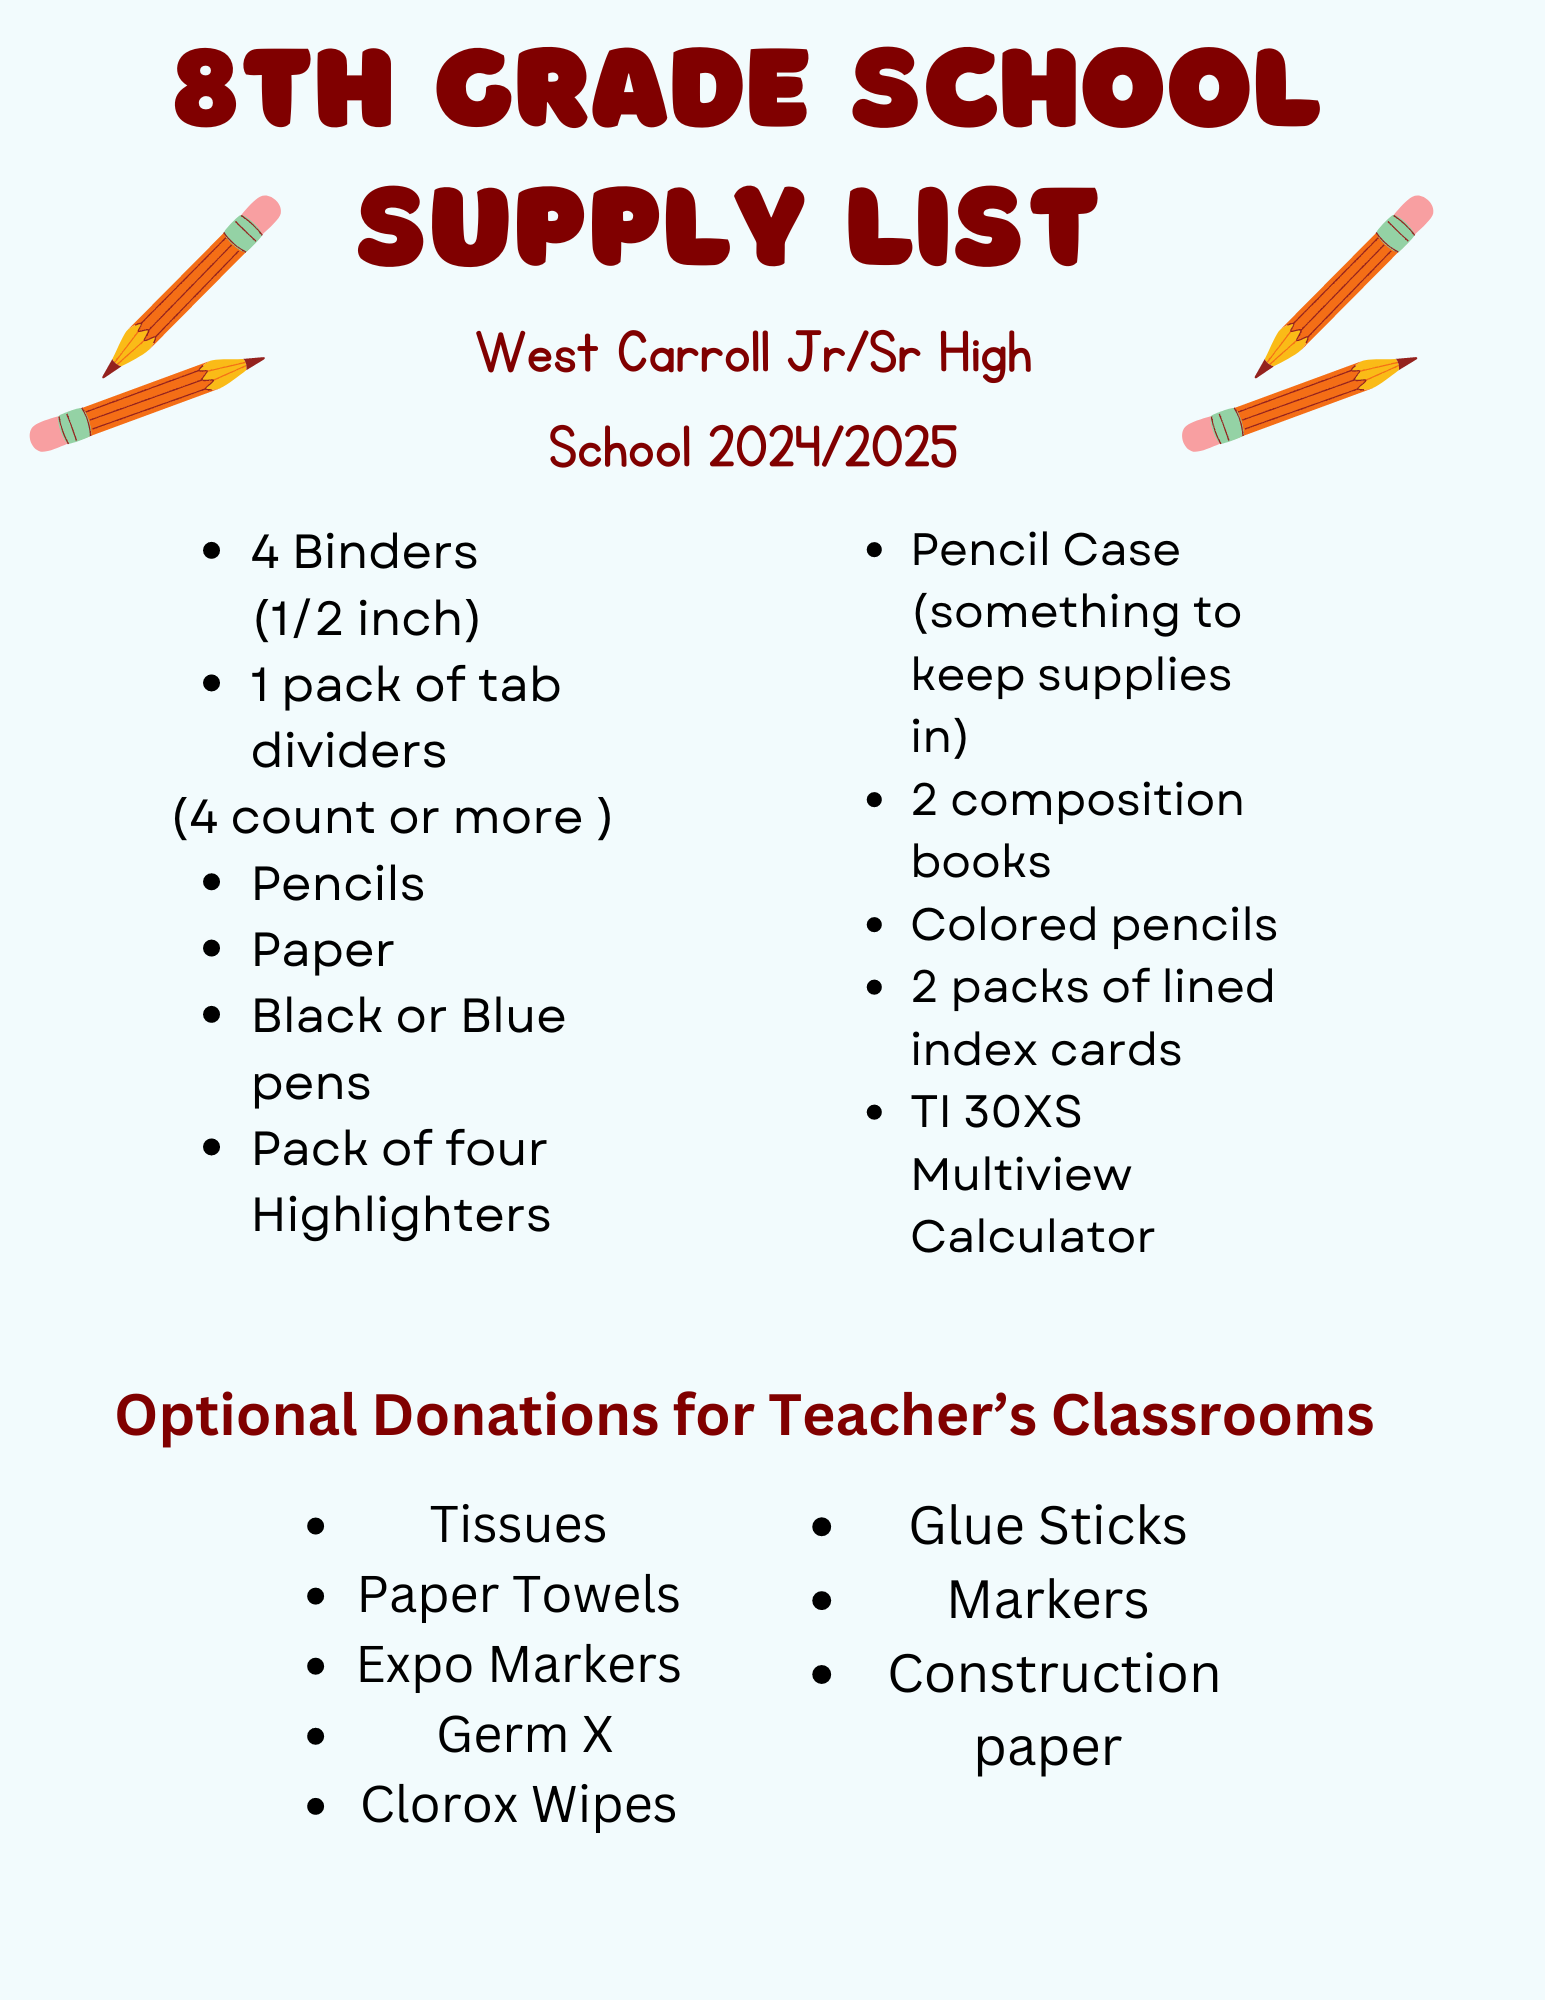 Please review the corrected supply list for 8th grade students at West Carroll Junior High School.